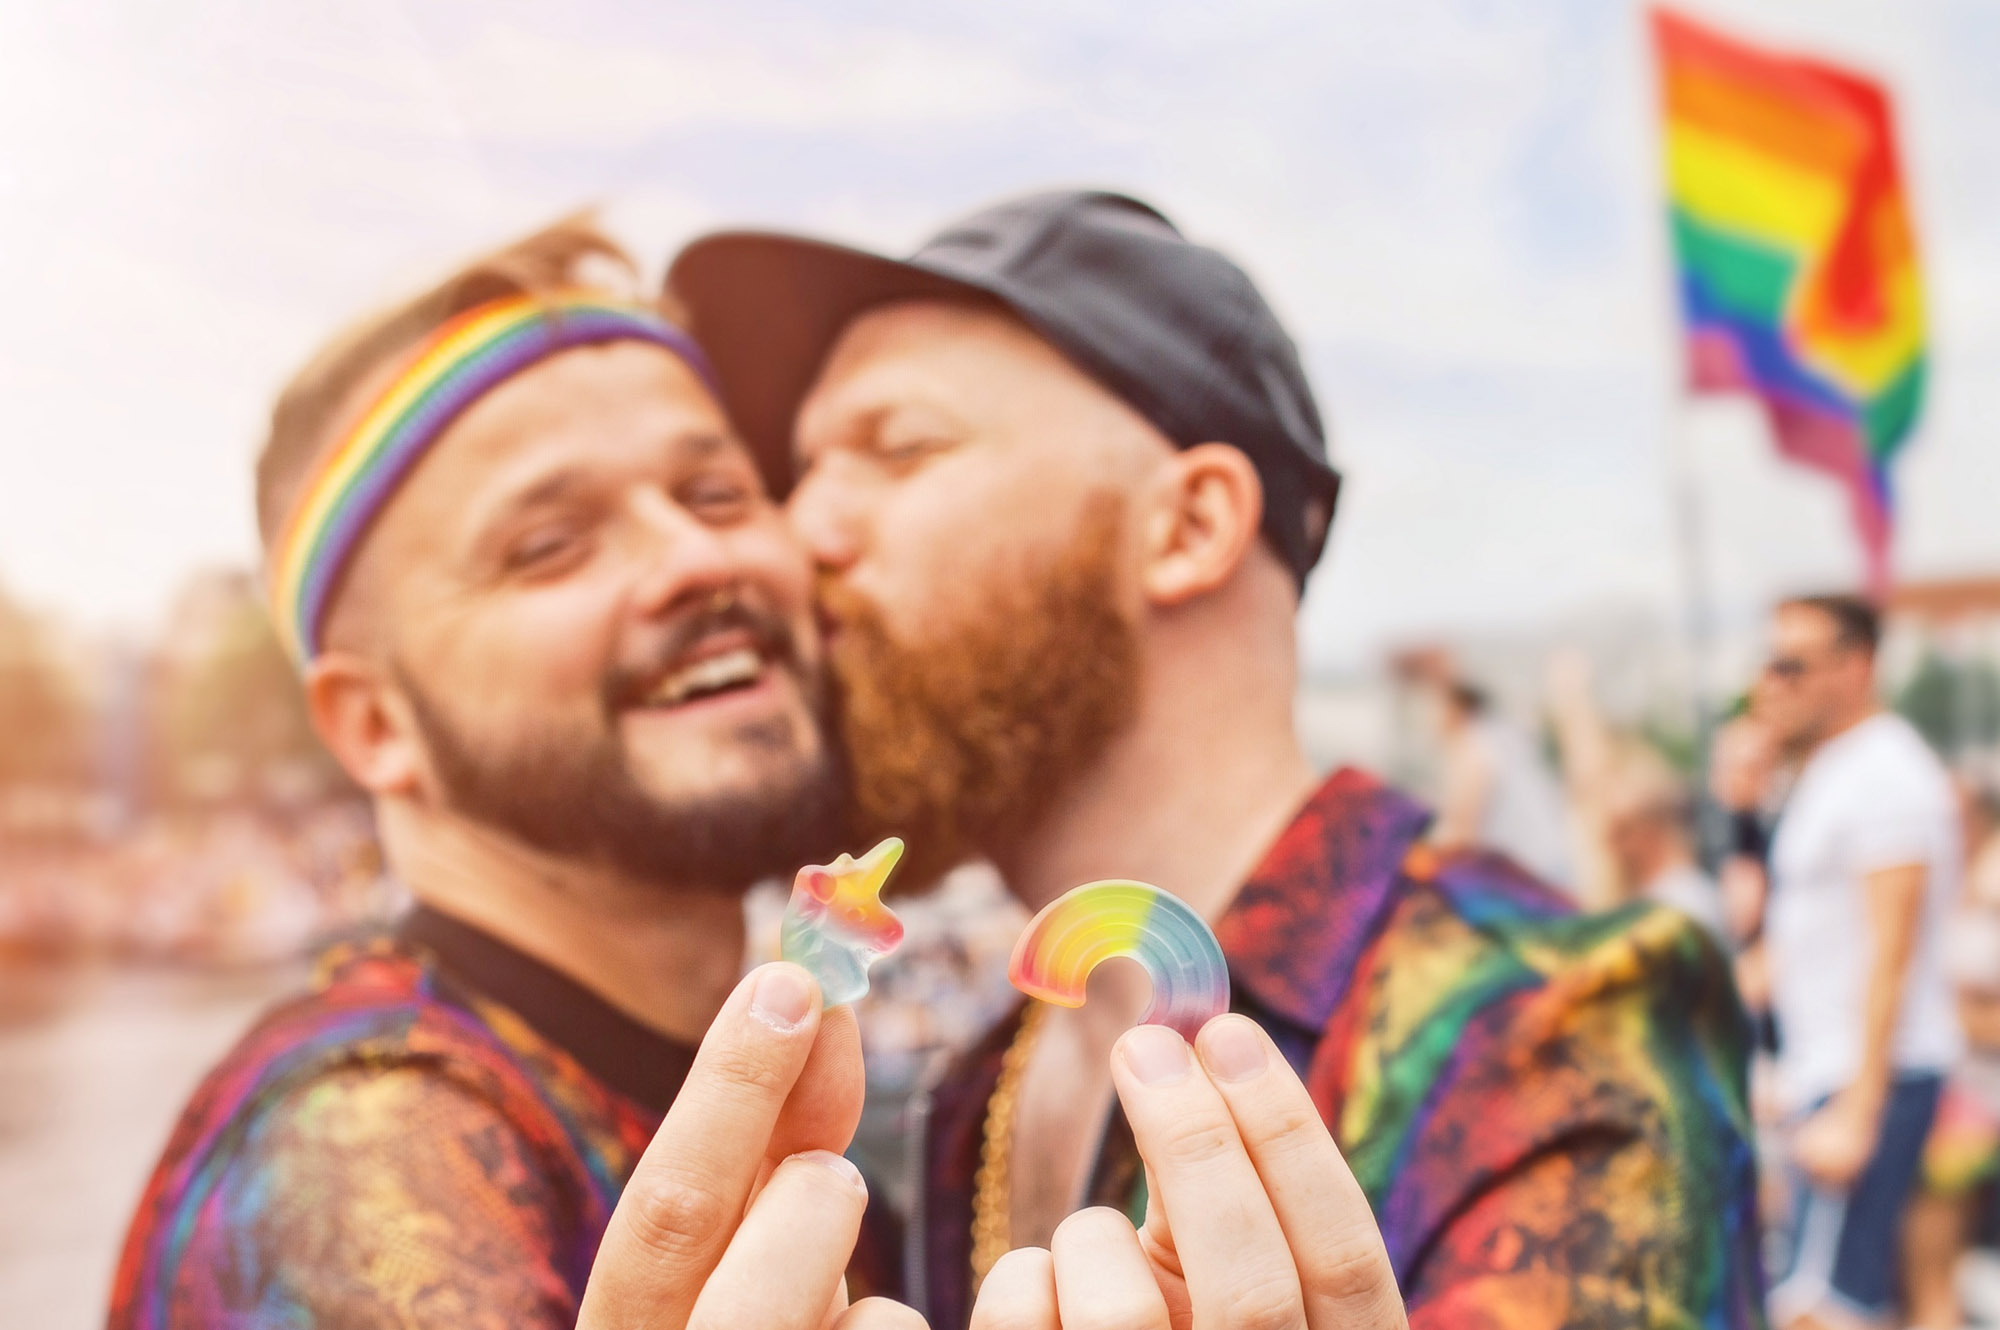 Get inspired! Our best 6 Gay Pride Parades of 2019